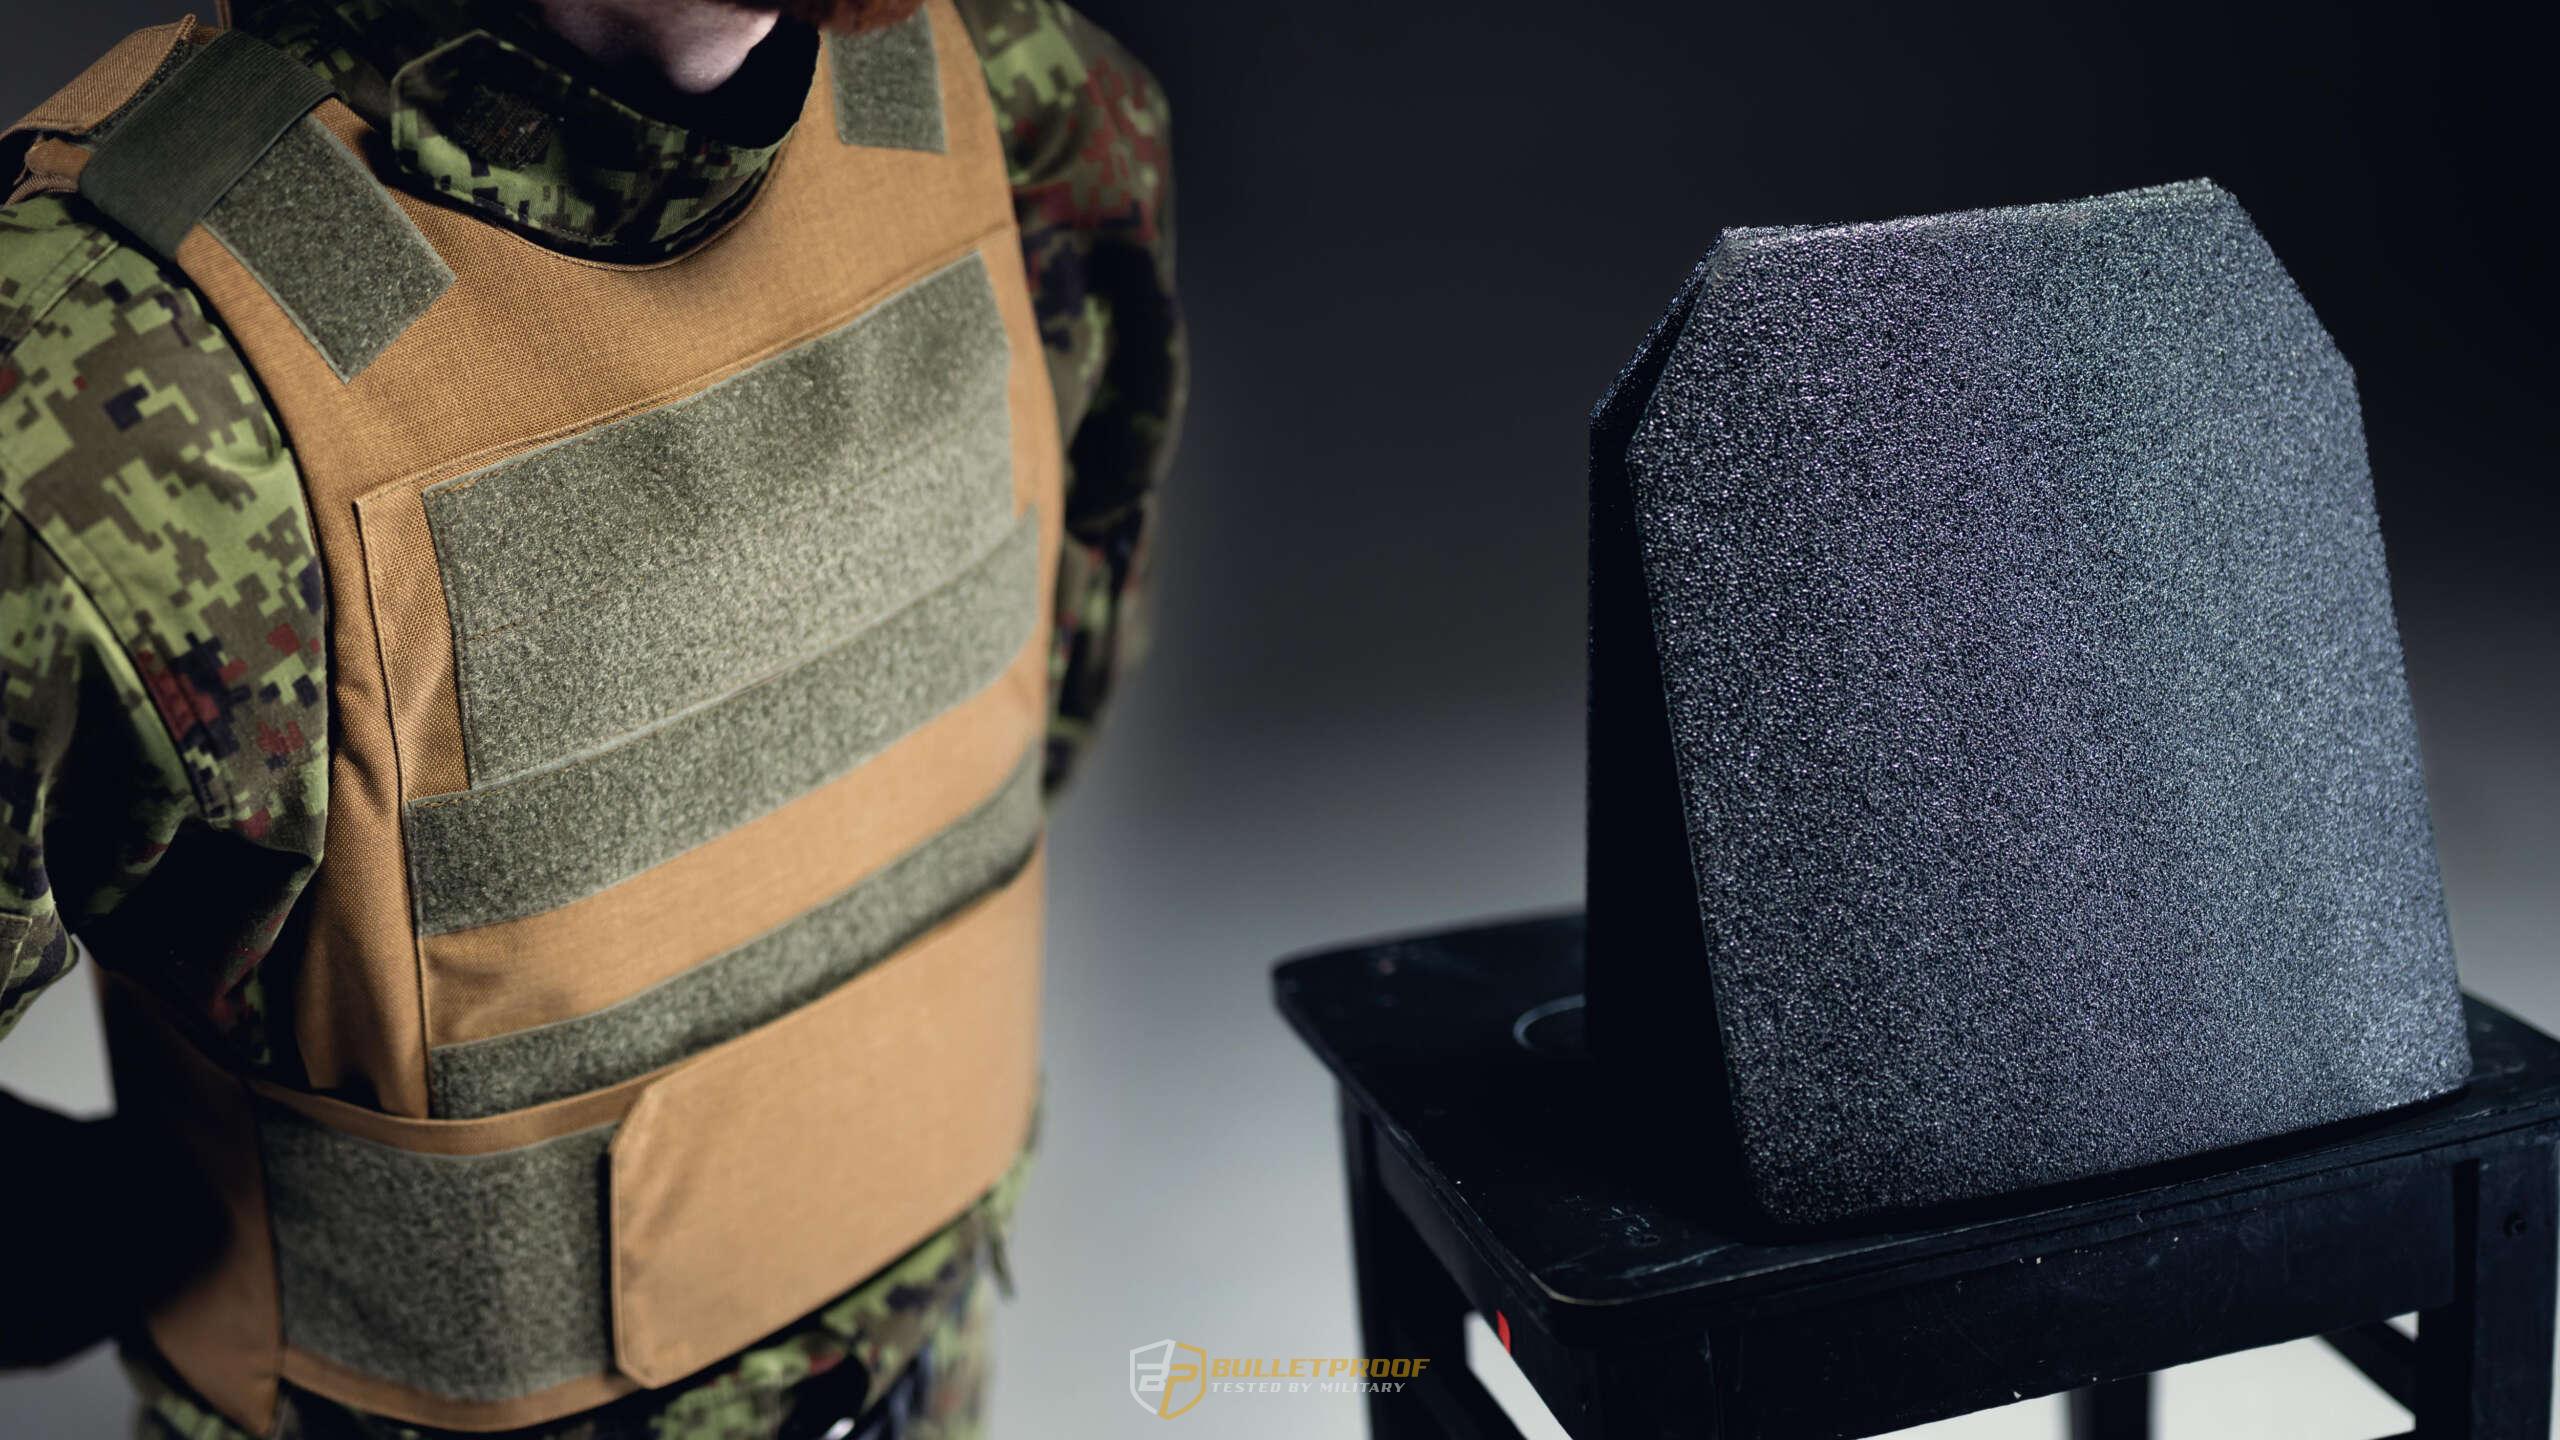 Ballistic plate carrier / bulletproof vest and bulletproof plate. Military products